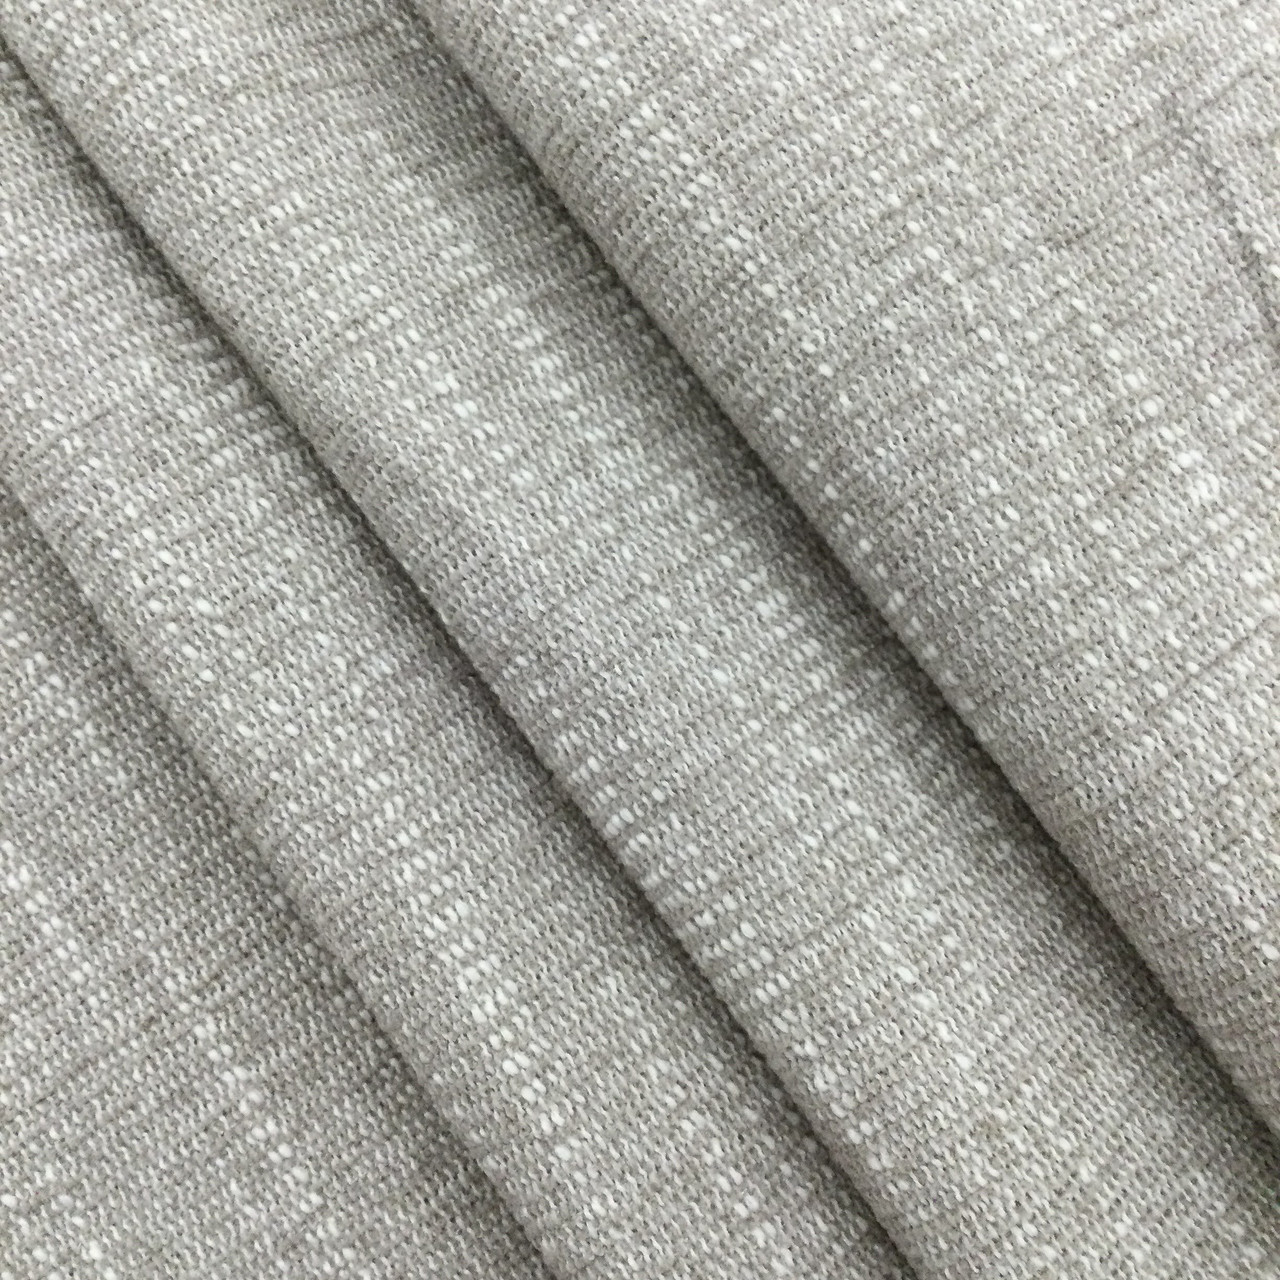 Slub Weave Fabric in Grey and White | Home Decor / Upholstery ...